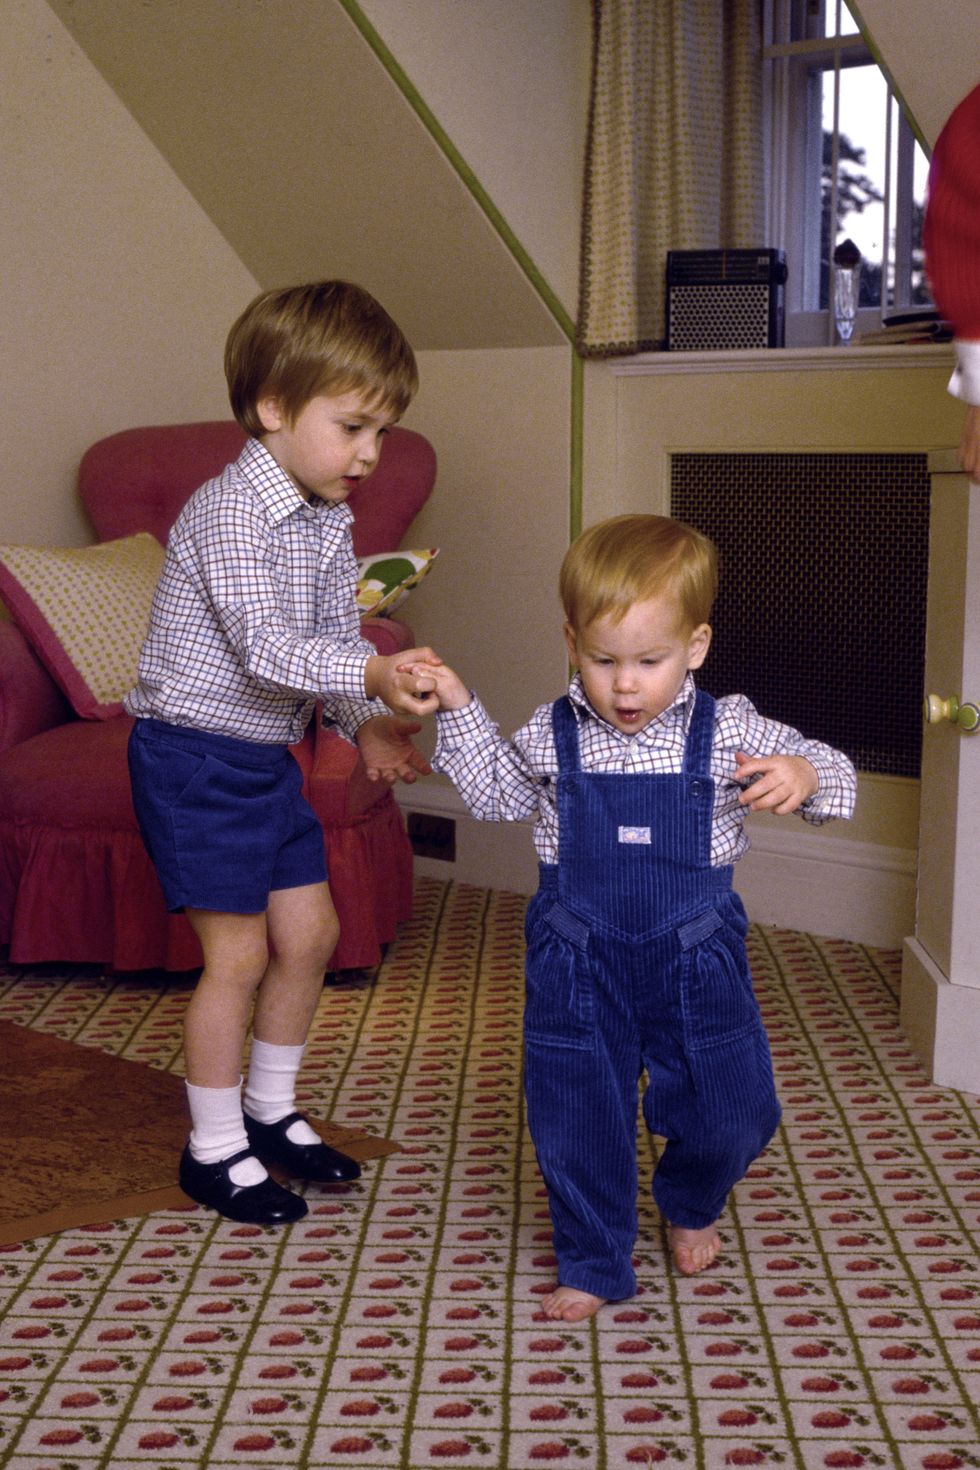 Prince William Attempting To Give His Baby Brother, Prince Harry, A Helping Hand As He Takes His First Steps At His Home, Kensington Palace